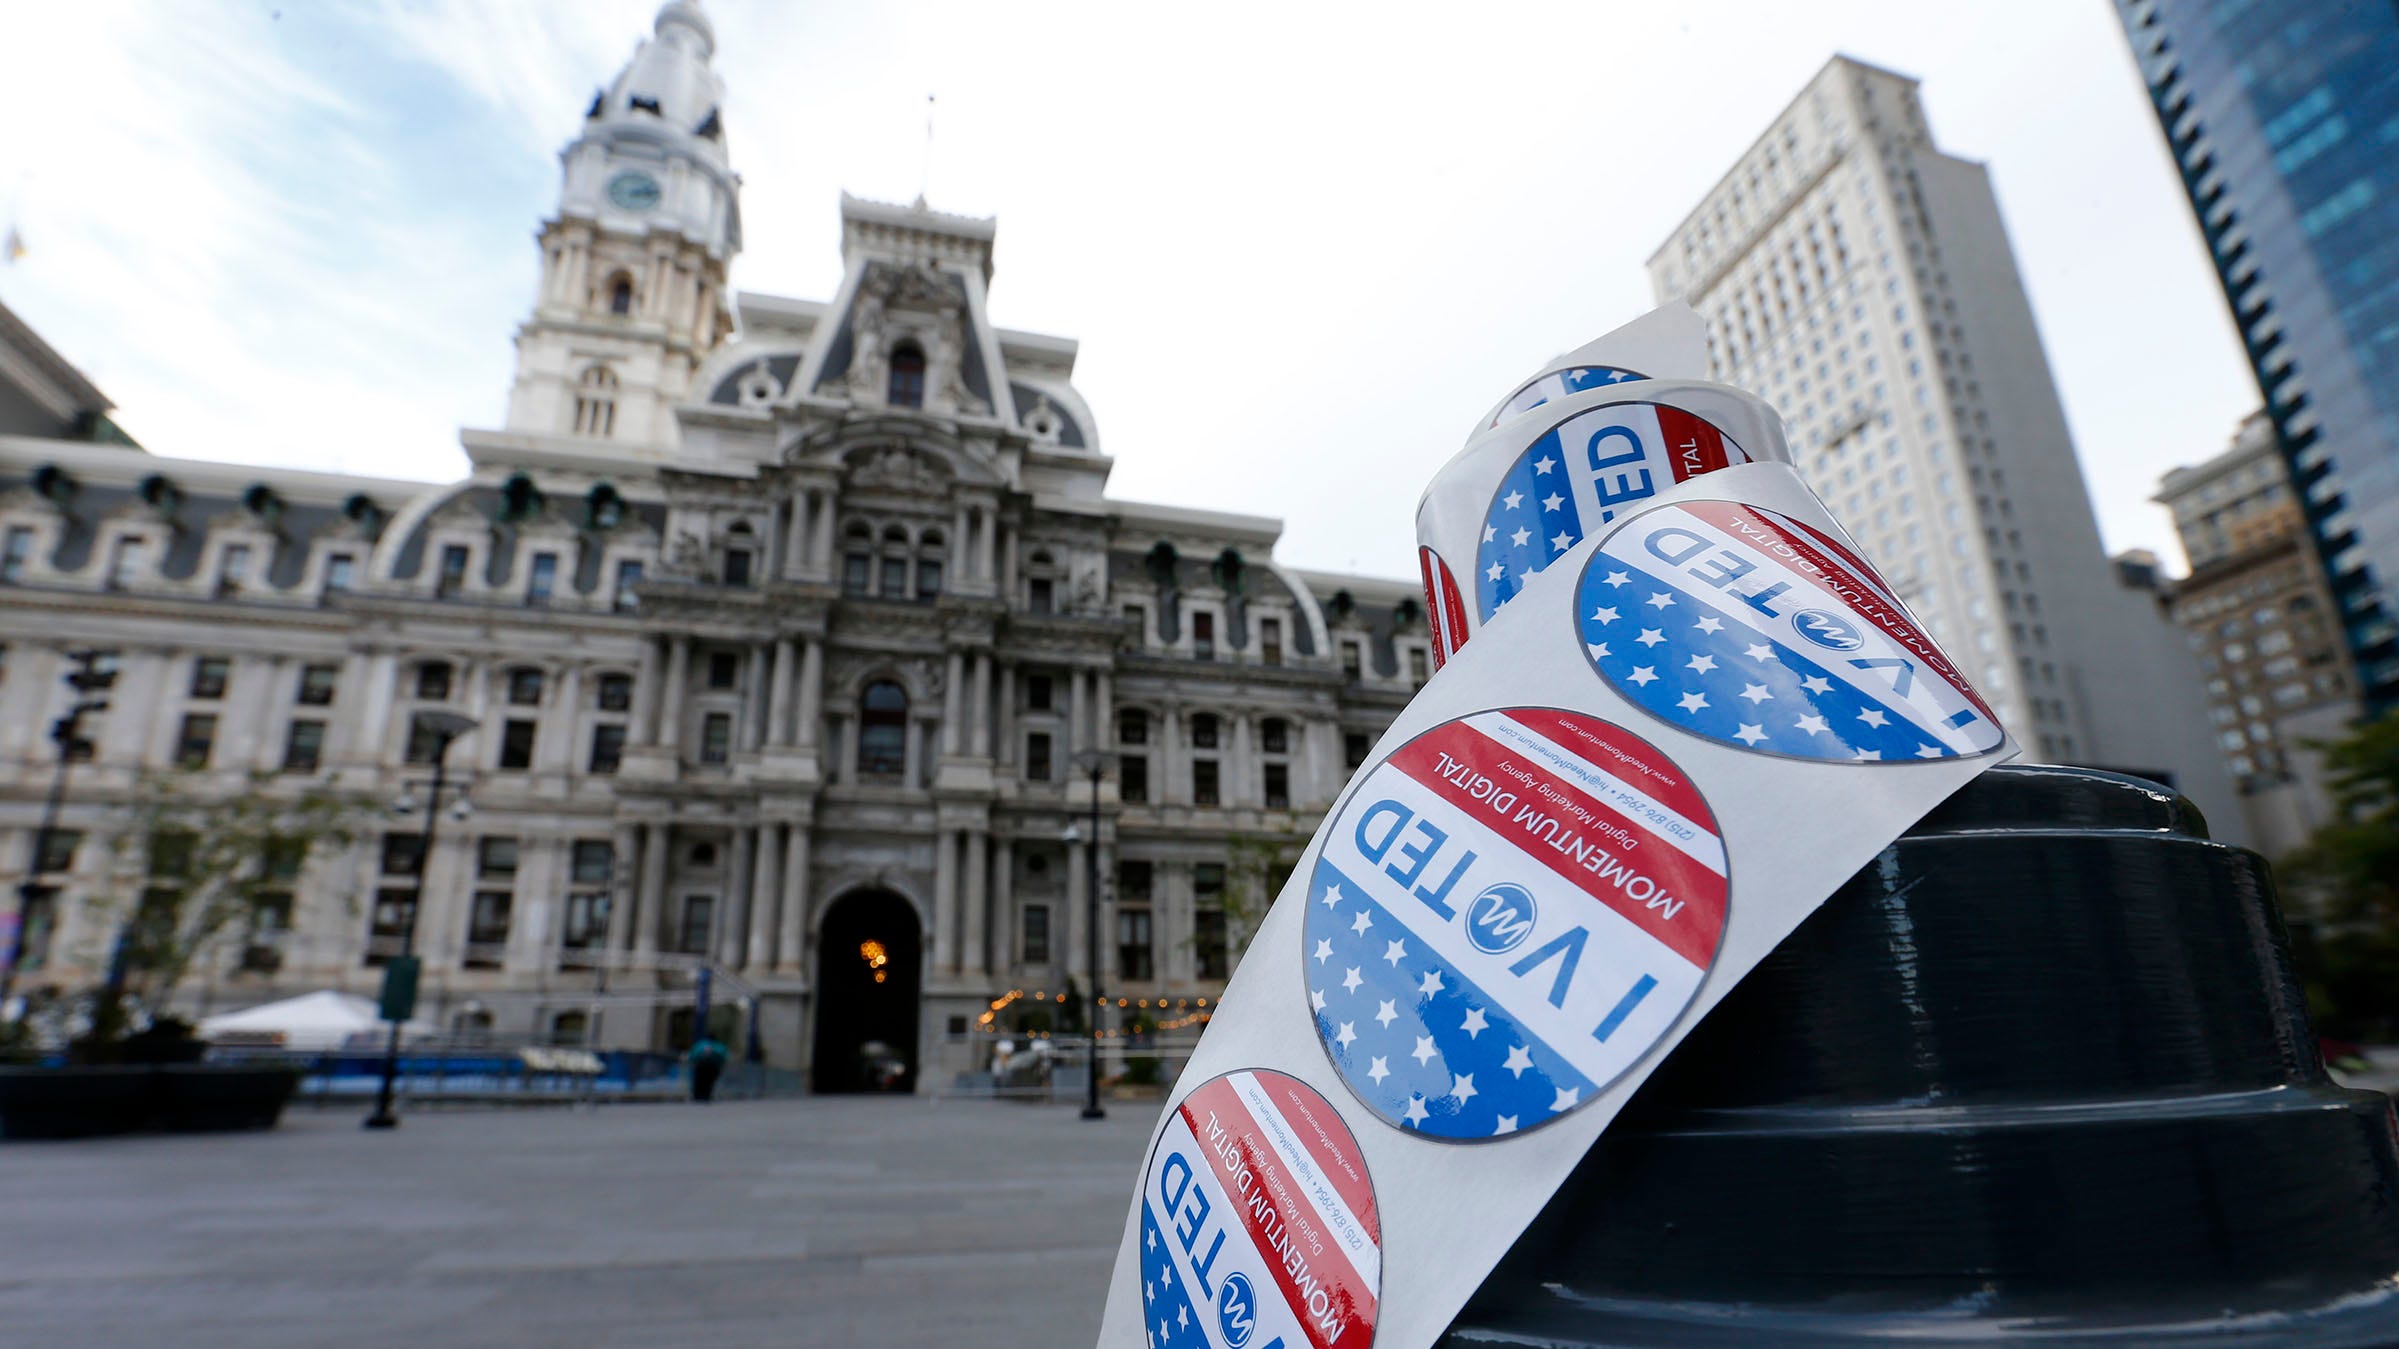 Voting snags strike the Philadelphia area early on 2020 Election Day